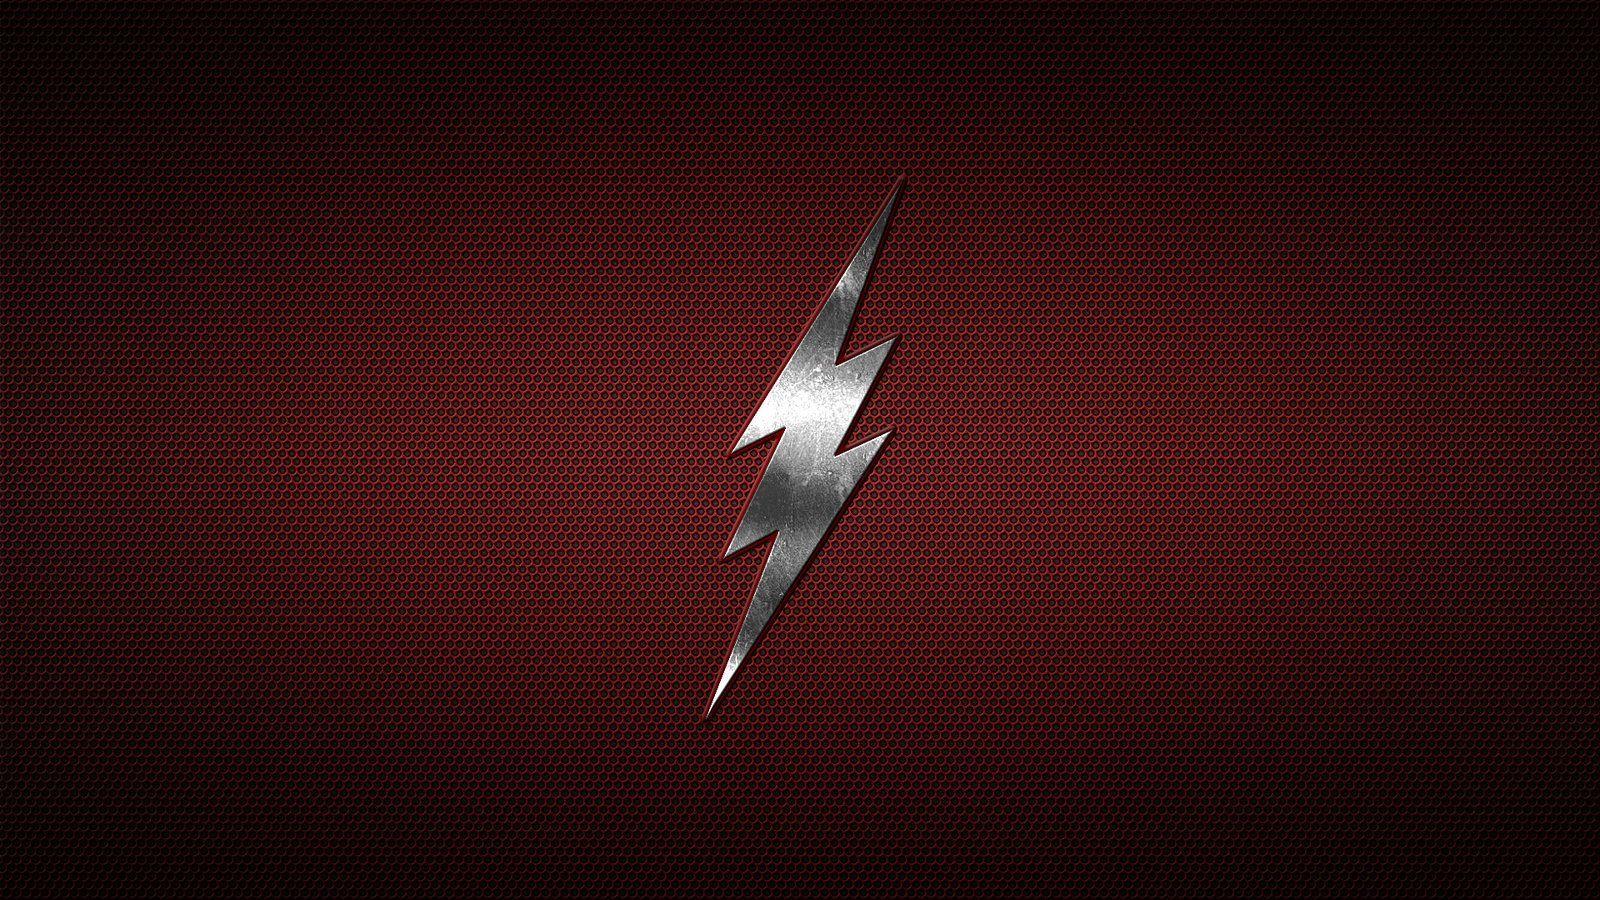 HD Wallpaper of The Flash. The flash, Papeis de parede, Herois